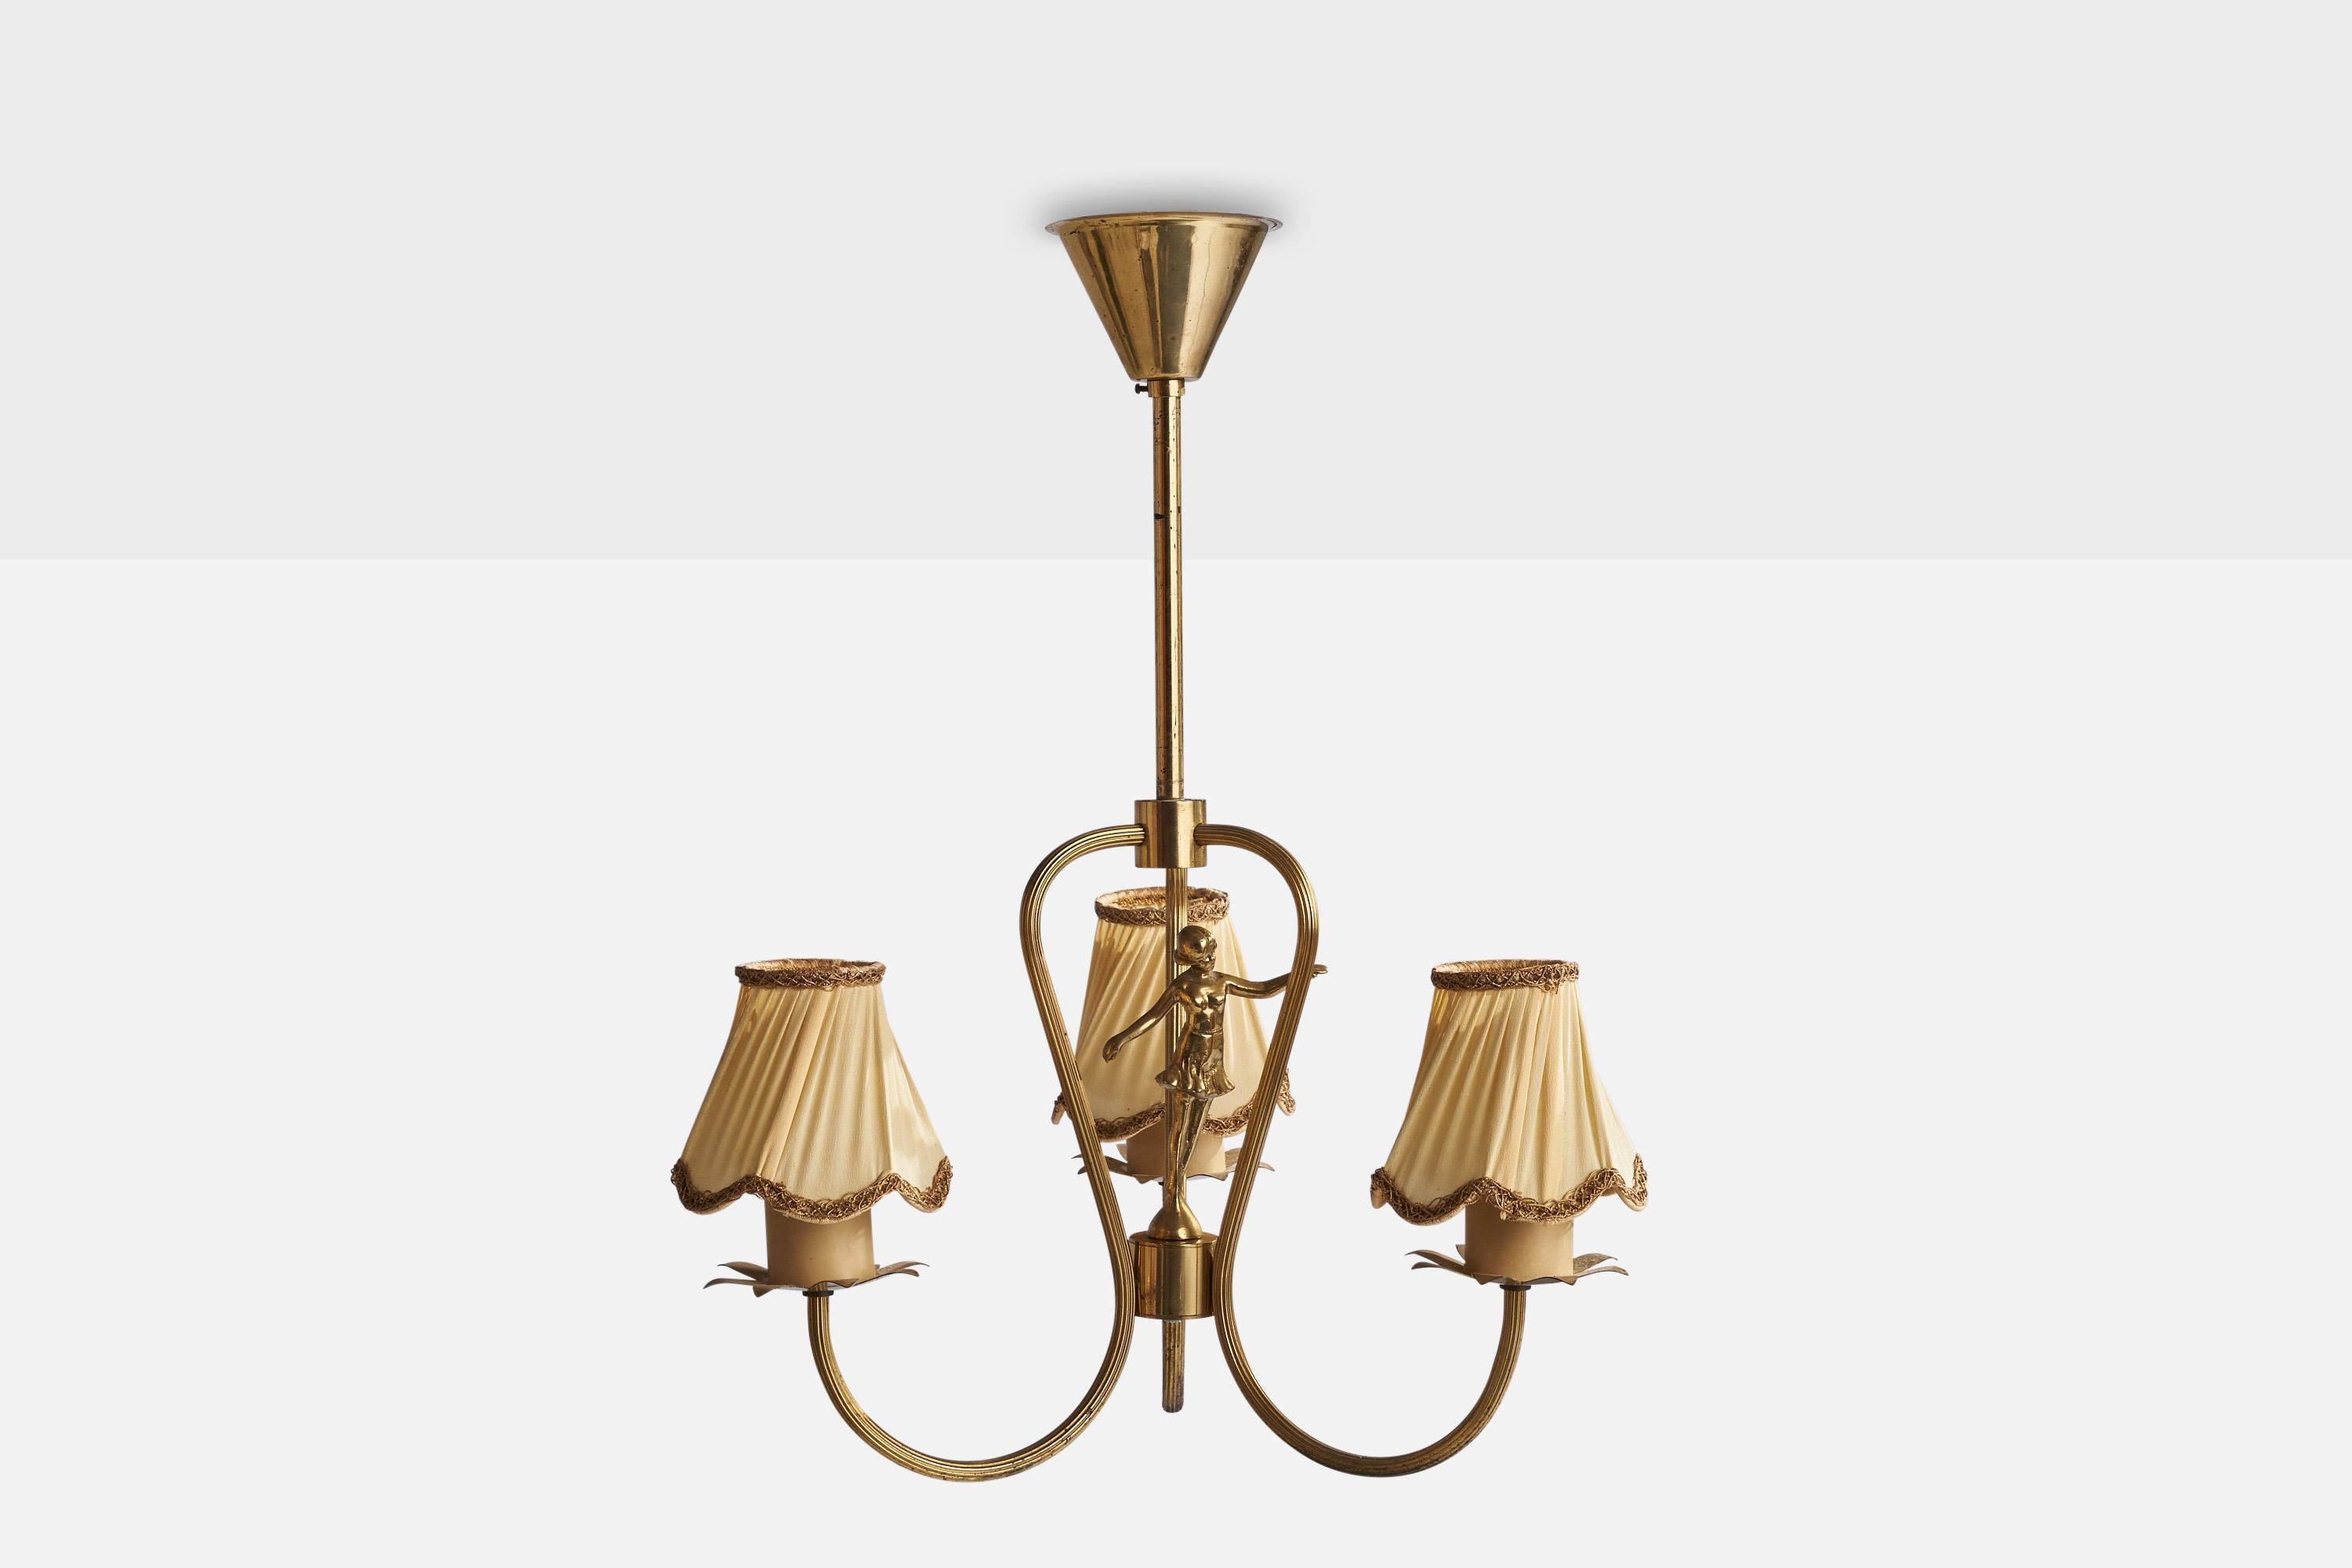 A brass and off-white fabric chandelier designed and produced in Sweden, 1930s.

Dimensions of canopy (inches): 3.25” H x 4”  Diameter
Socket takes standard E-26 bulbs. 3 sockets.There is no maximum wattage stated on the fixture. All lighting will